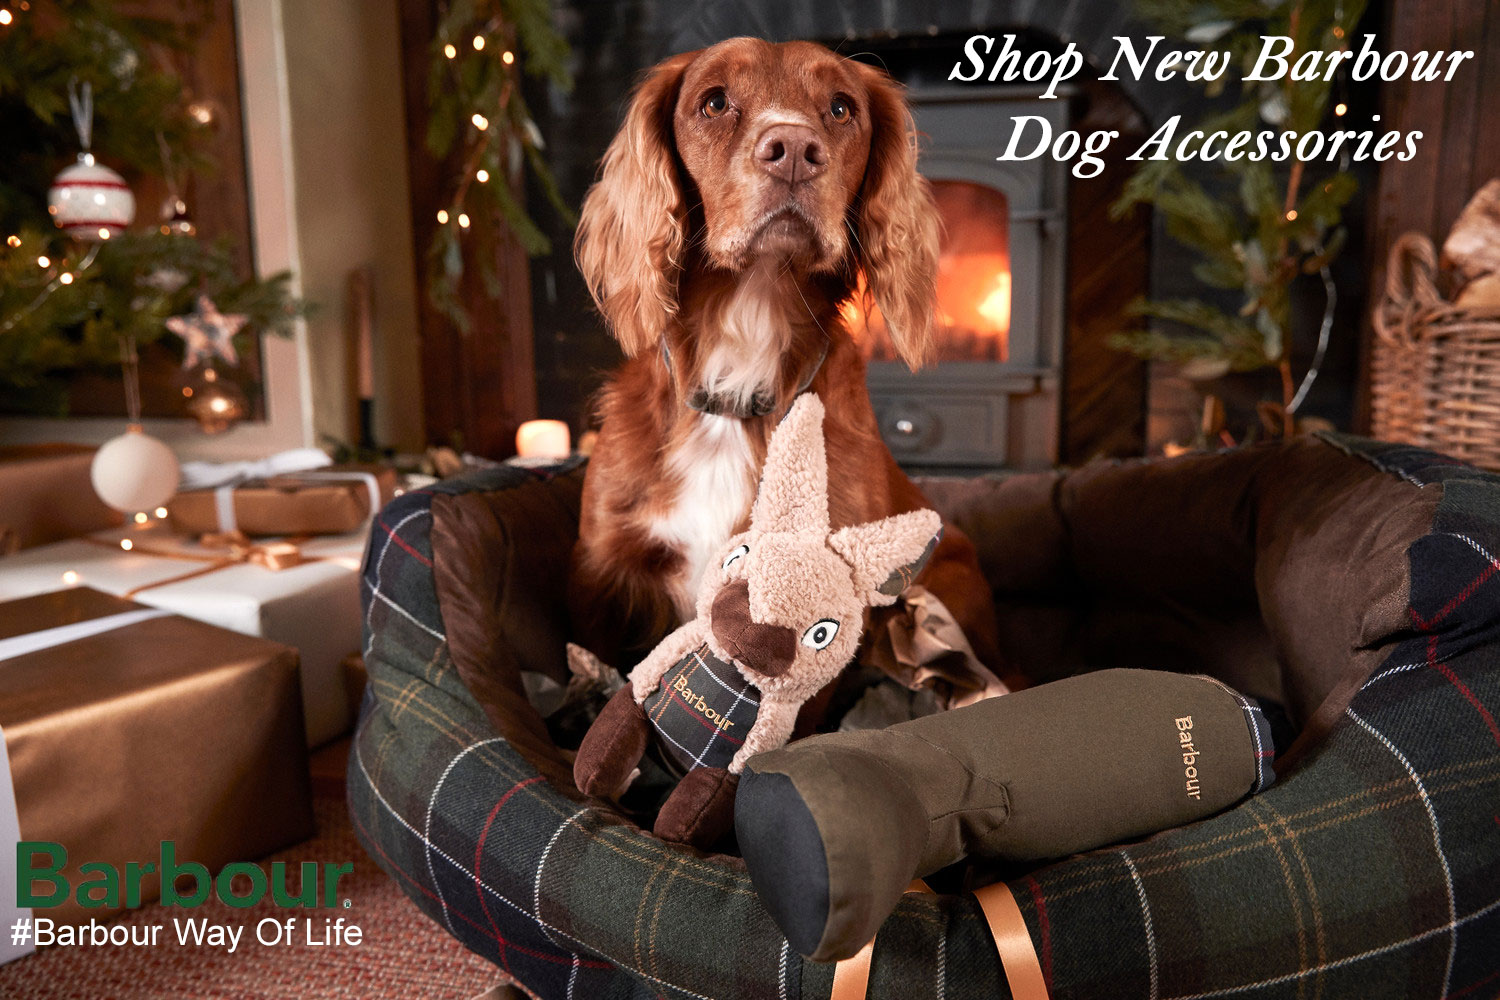 Barbour Dog Accessories